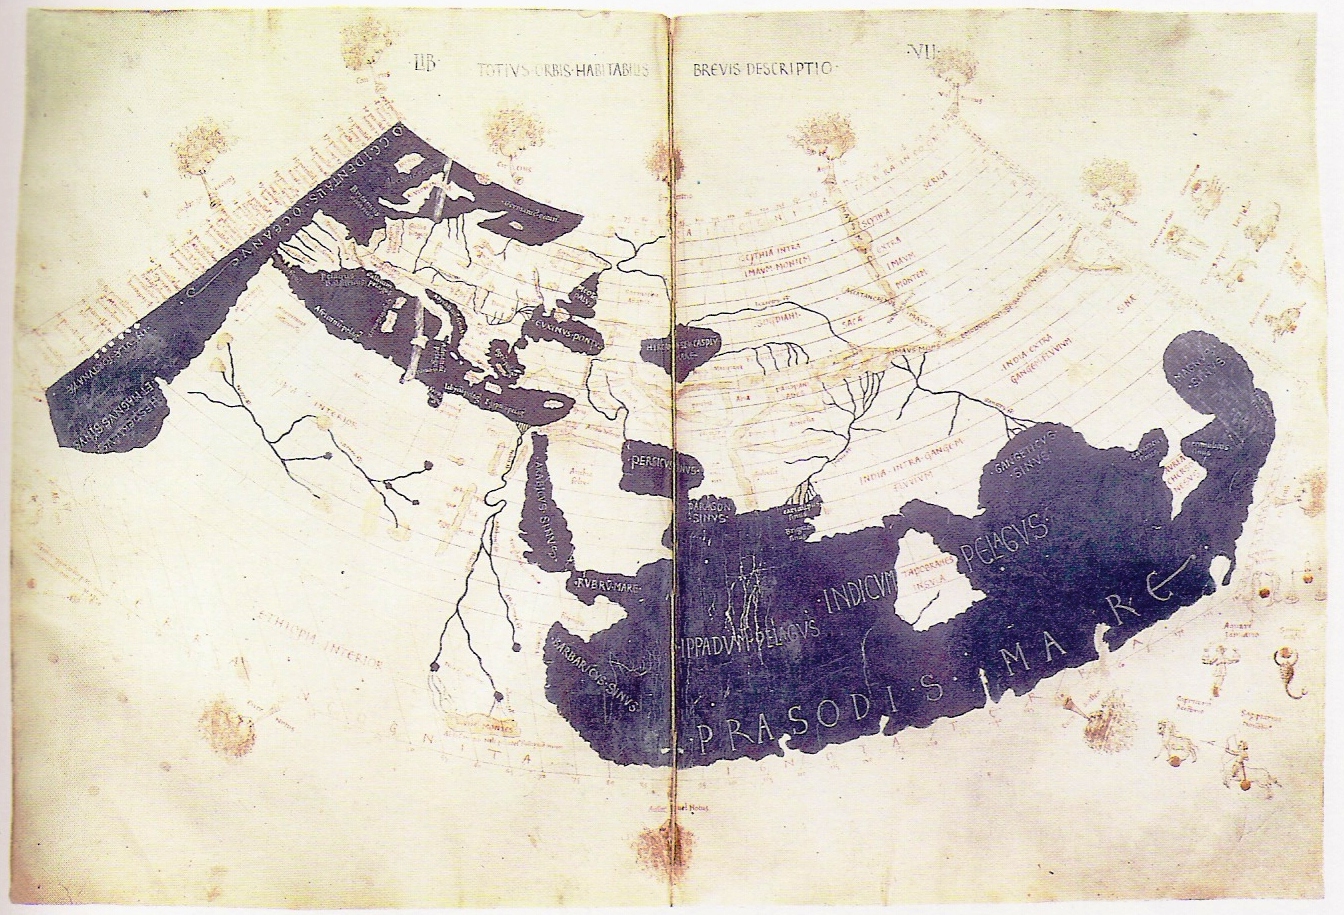 A 15th-century manuscript copy of the Ptolemy world map, reconstituted from Ptolemy's Geographia (circa 150), indicating the countries of "Serica" and "Sinae" (China) at the extreme east, beyond the island of "Taprobane" (Sri Lanka, oversized) and the "Aurea Chersonesus" (Malay Peninsula).